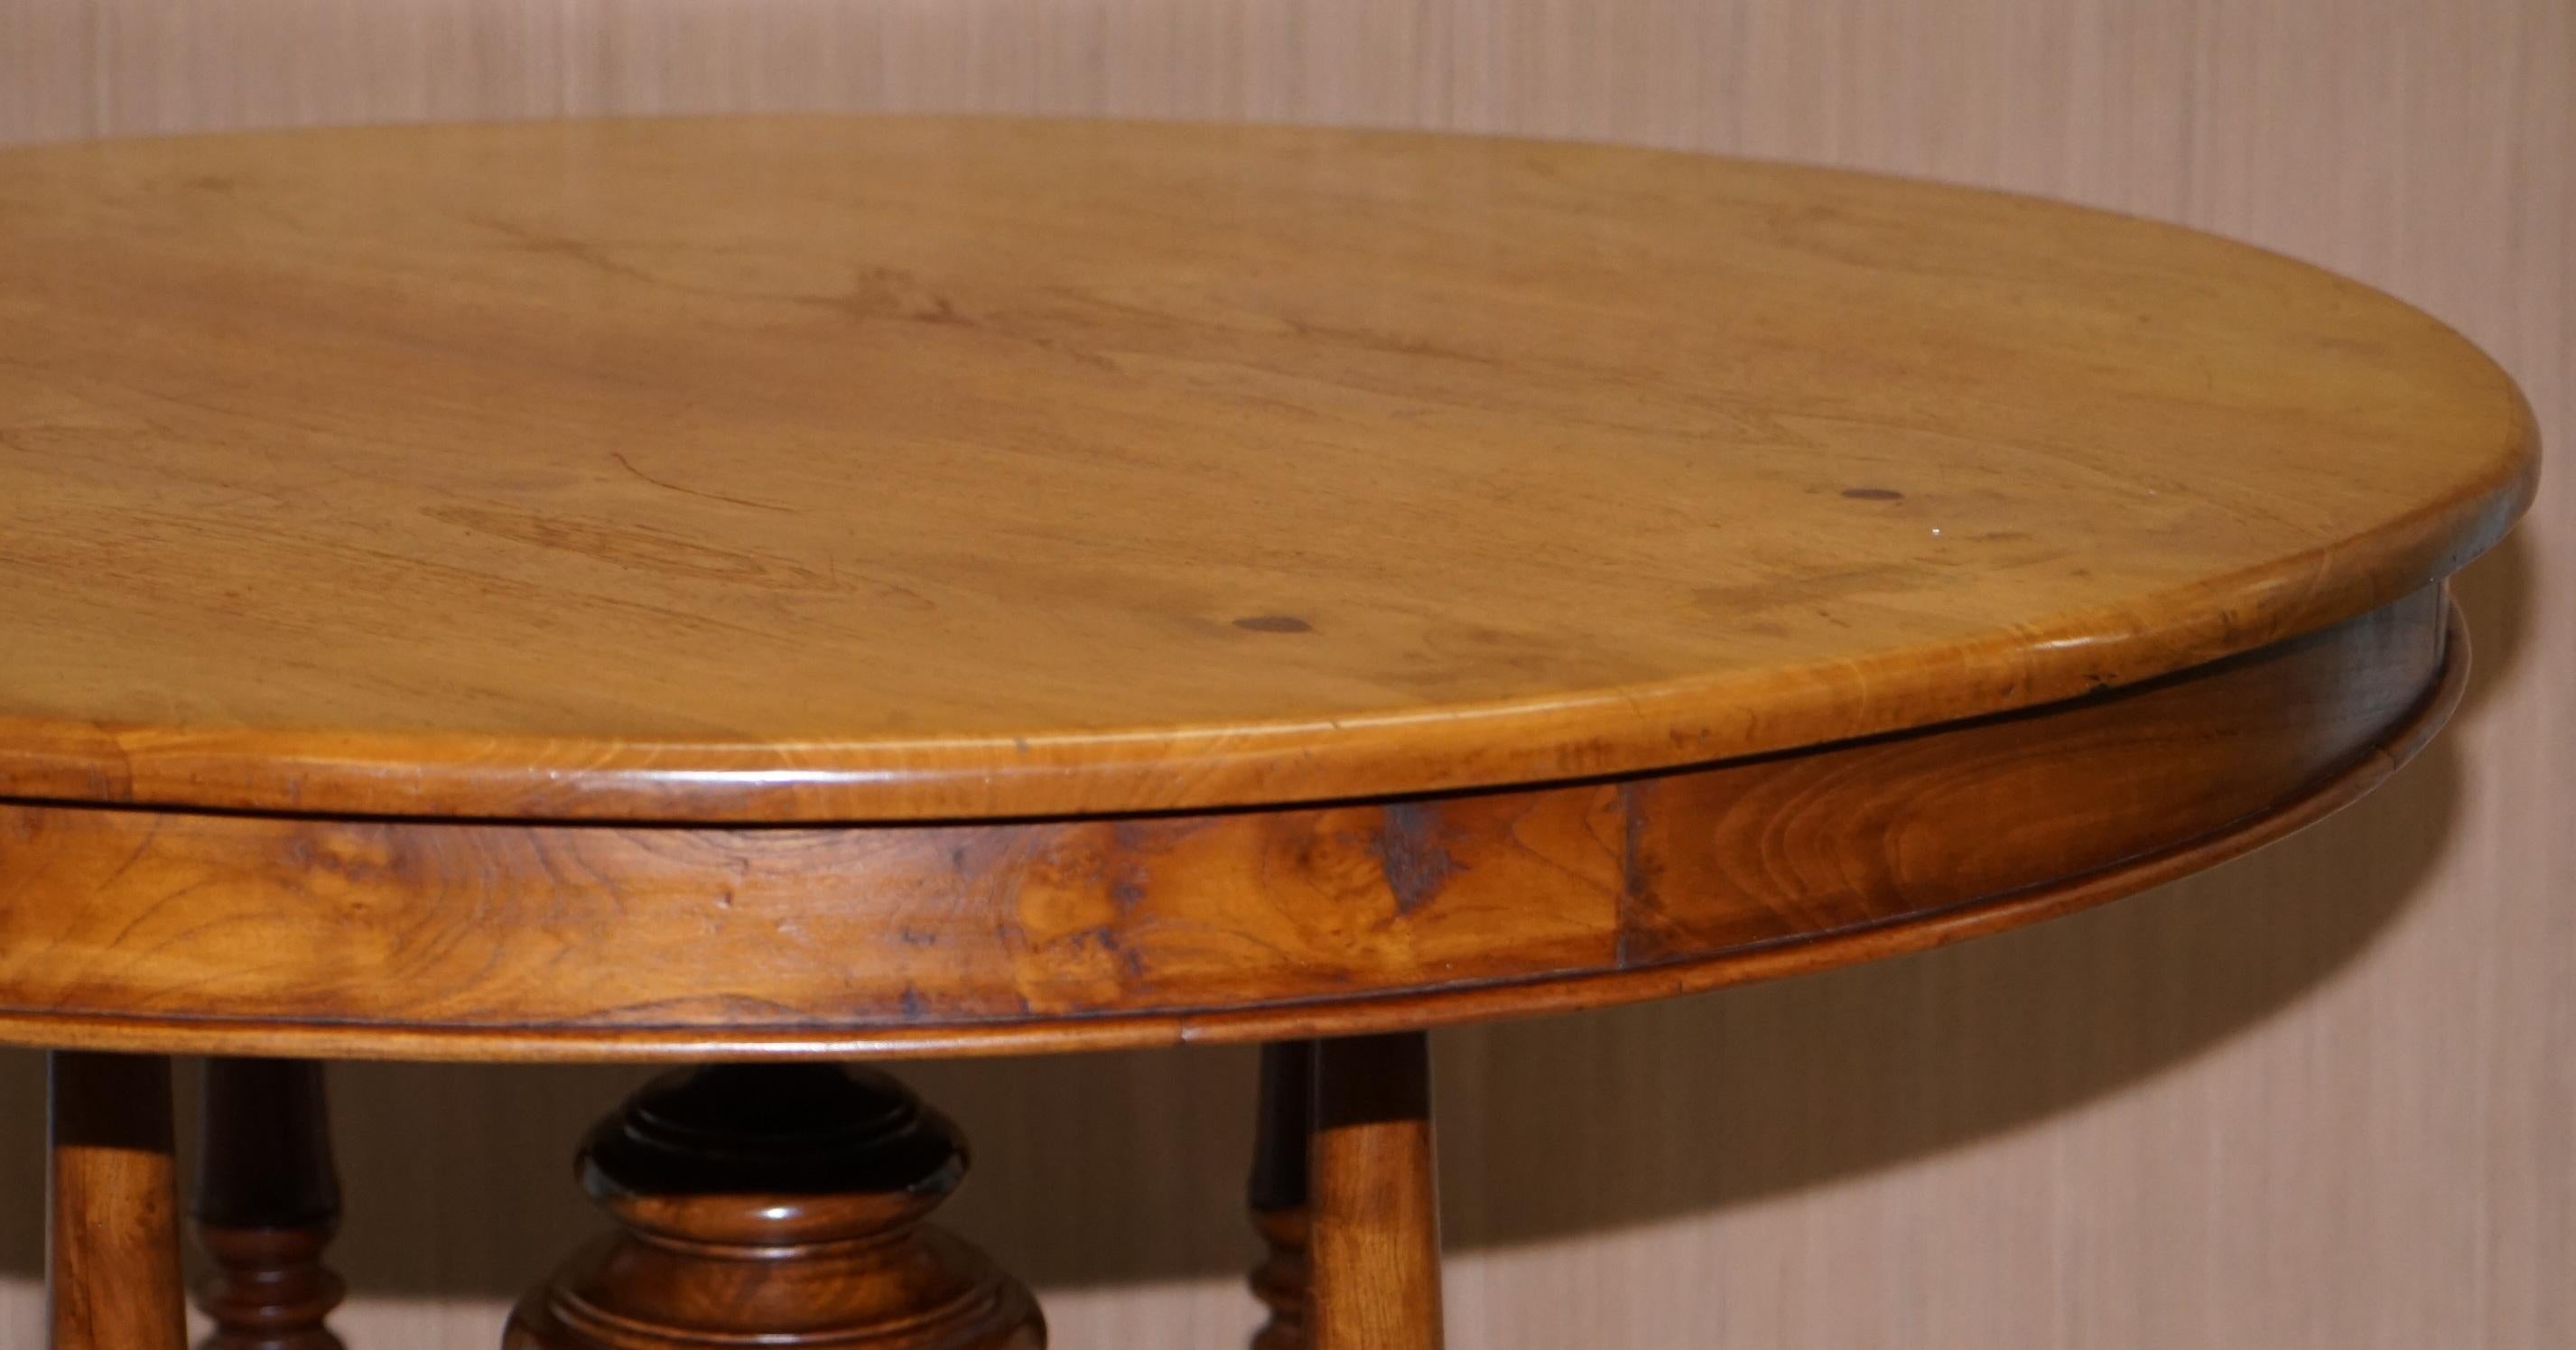 Lovely Vintage Solid Golden Mahogany Round Dining Table Ornately Carved Legs 3